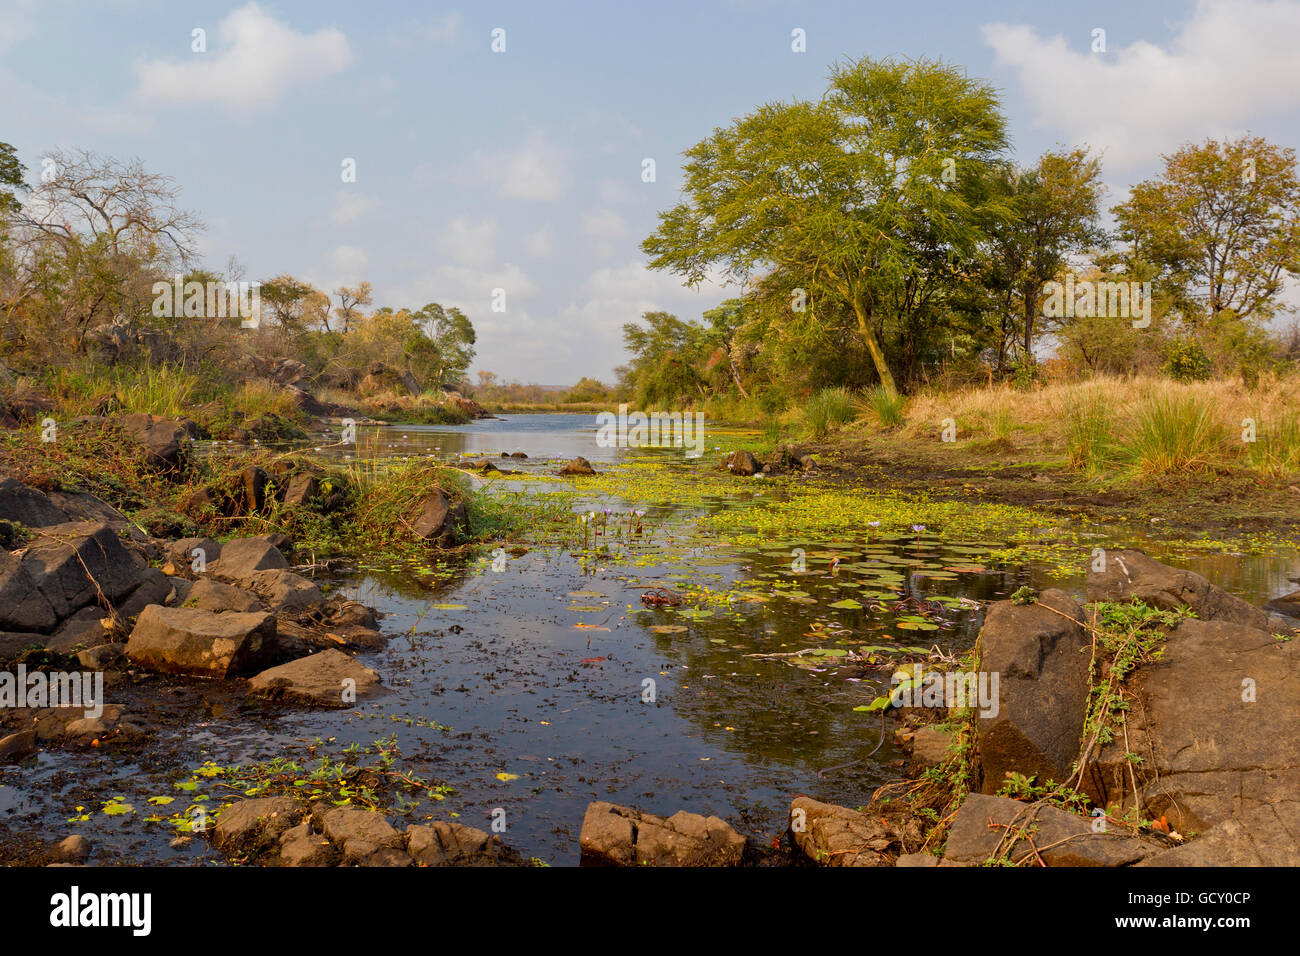 Machampane river in Limpopo National Park, Mozambique, Africa Stock Photo